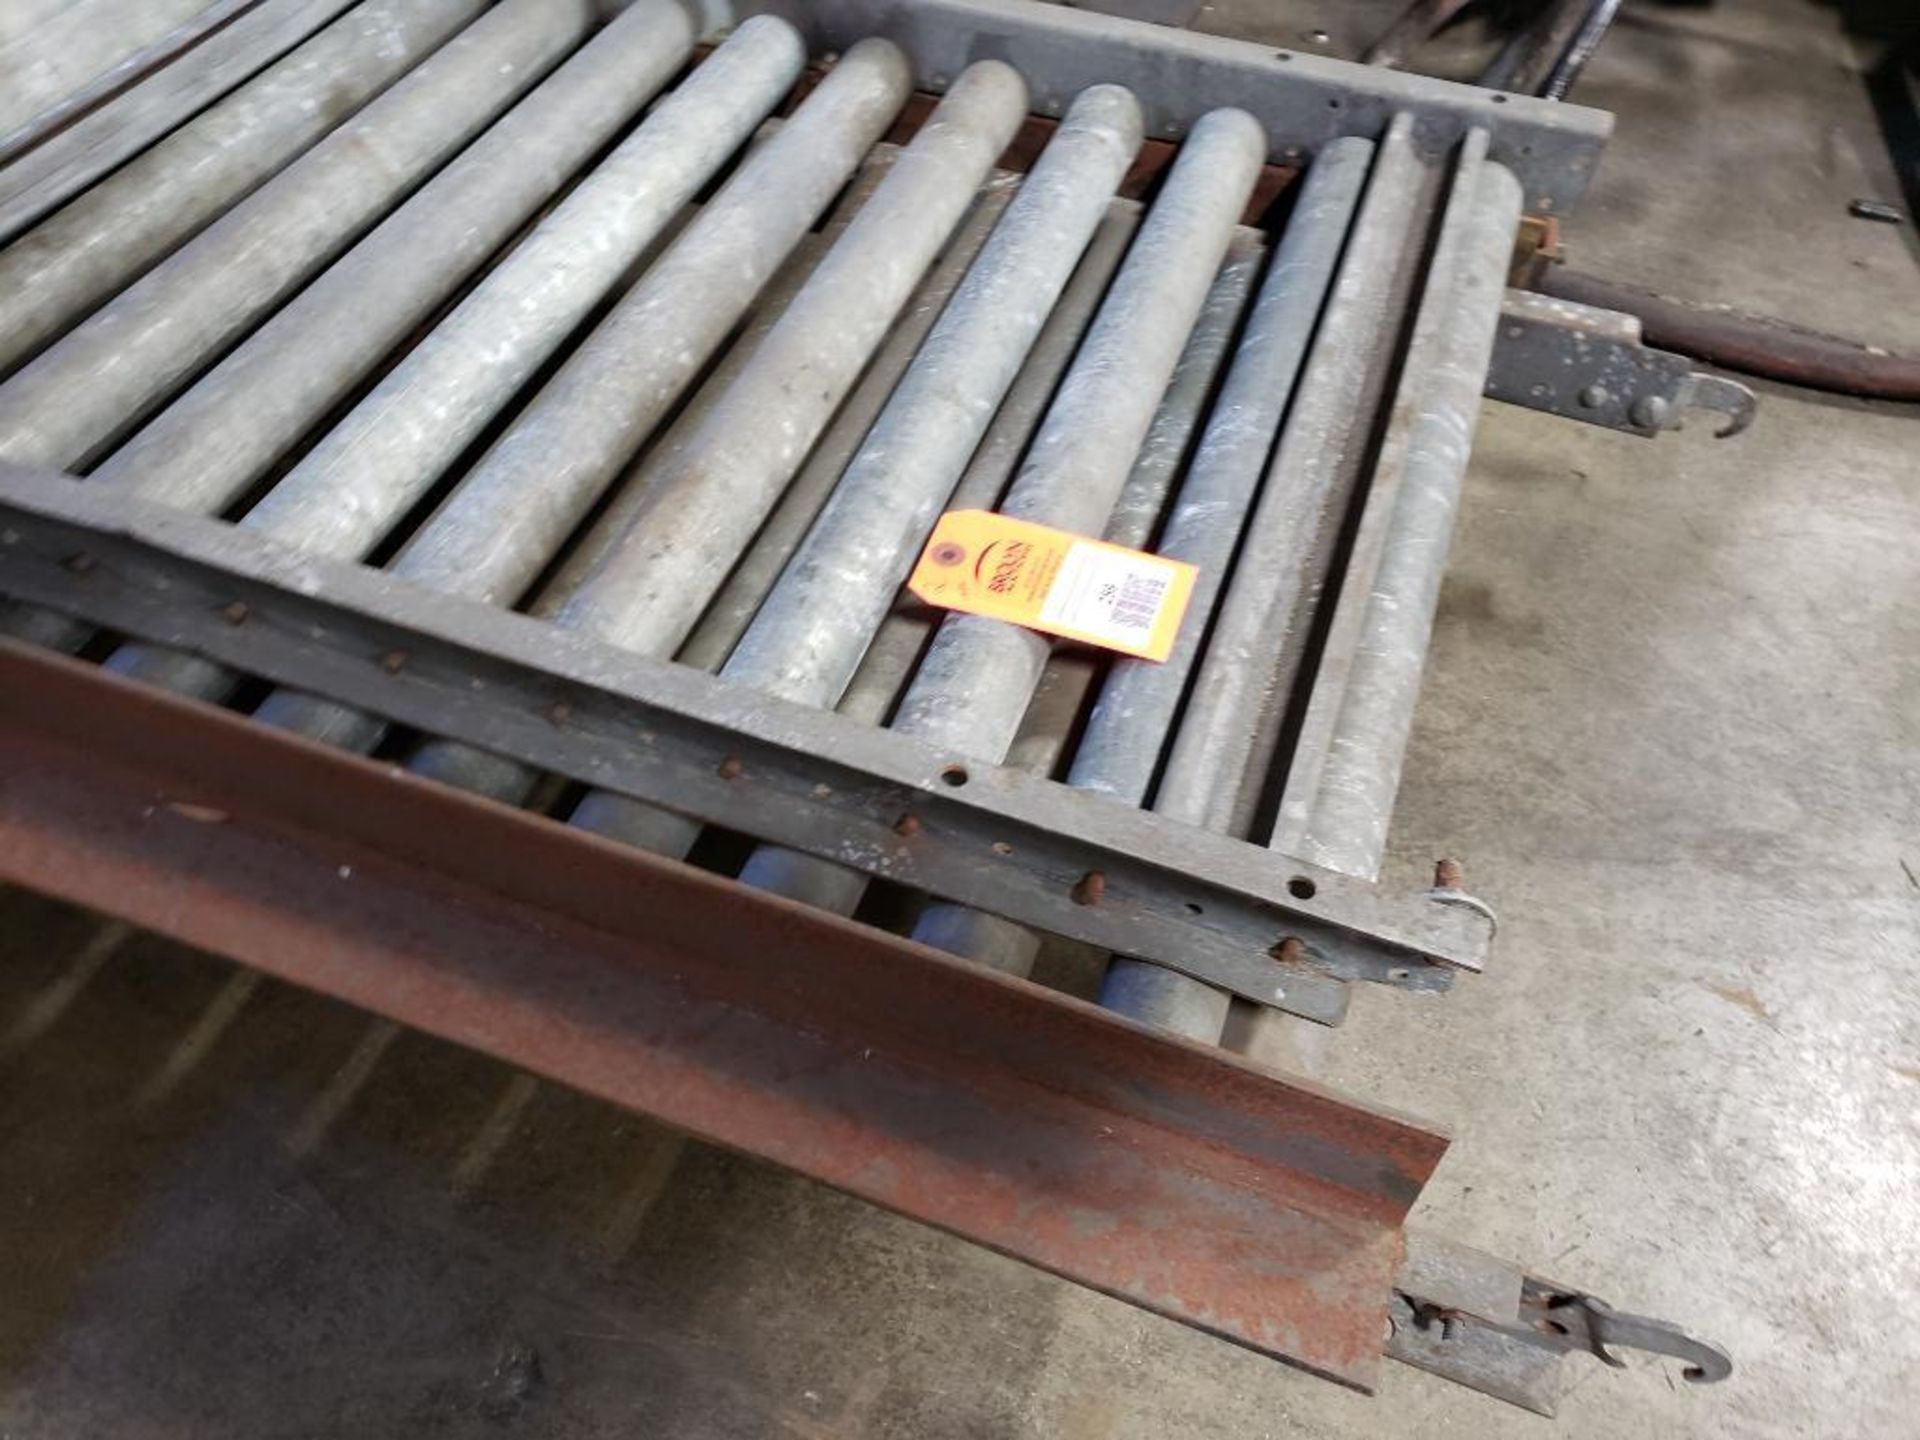 Qty 2 - 10Ft long heavy duty roller table. - Image 2 of 4